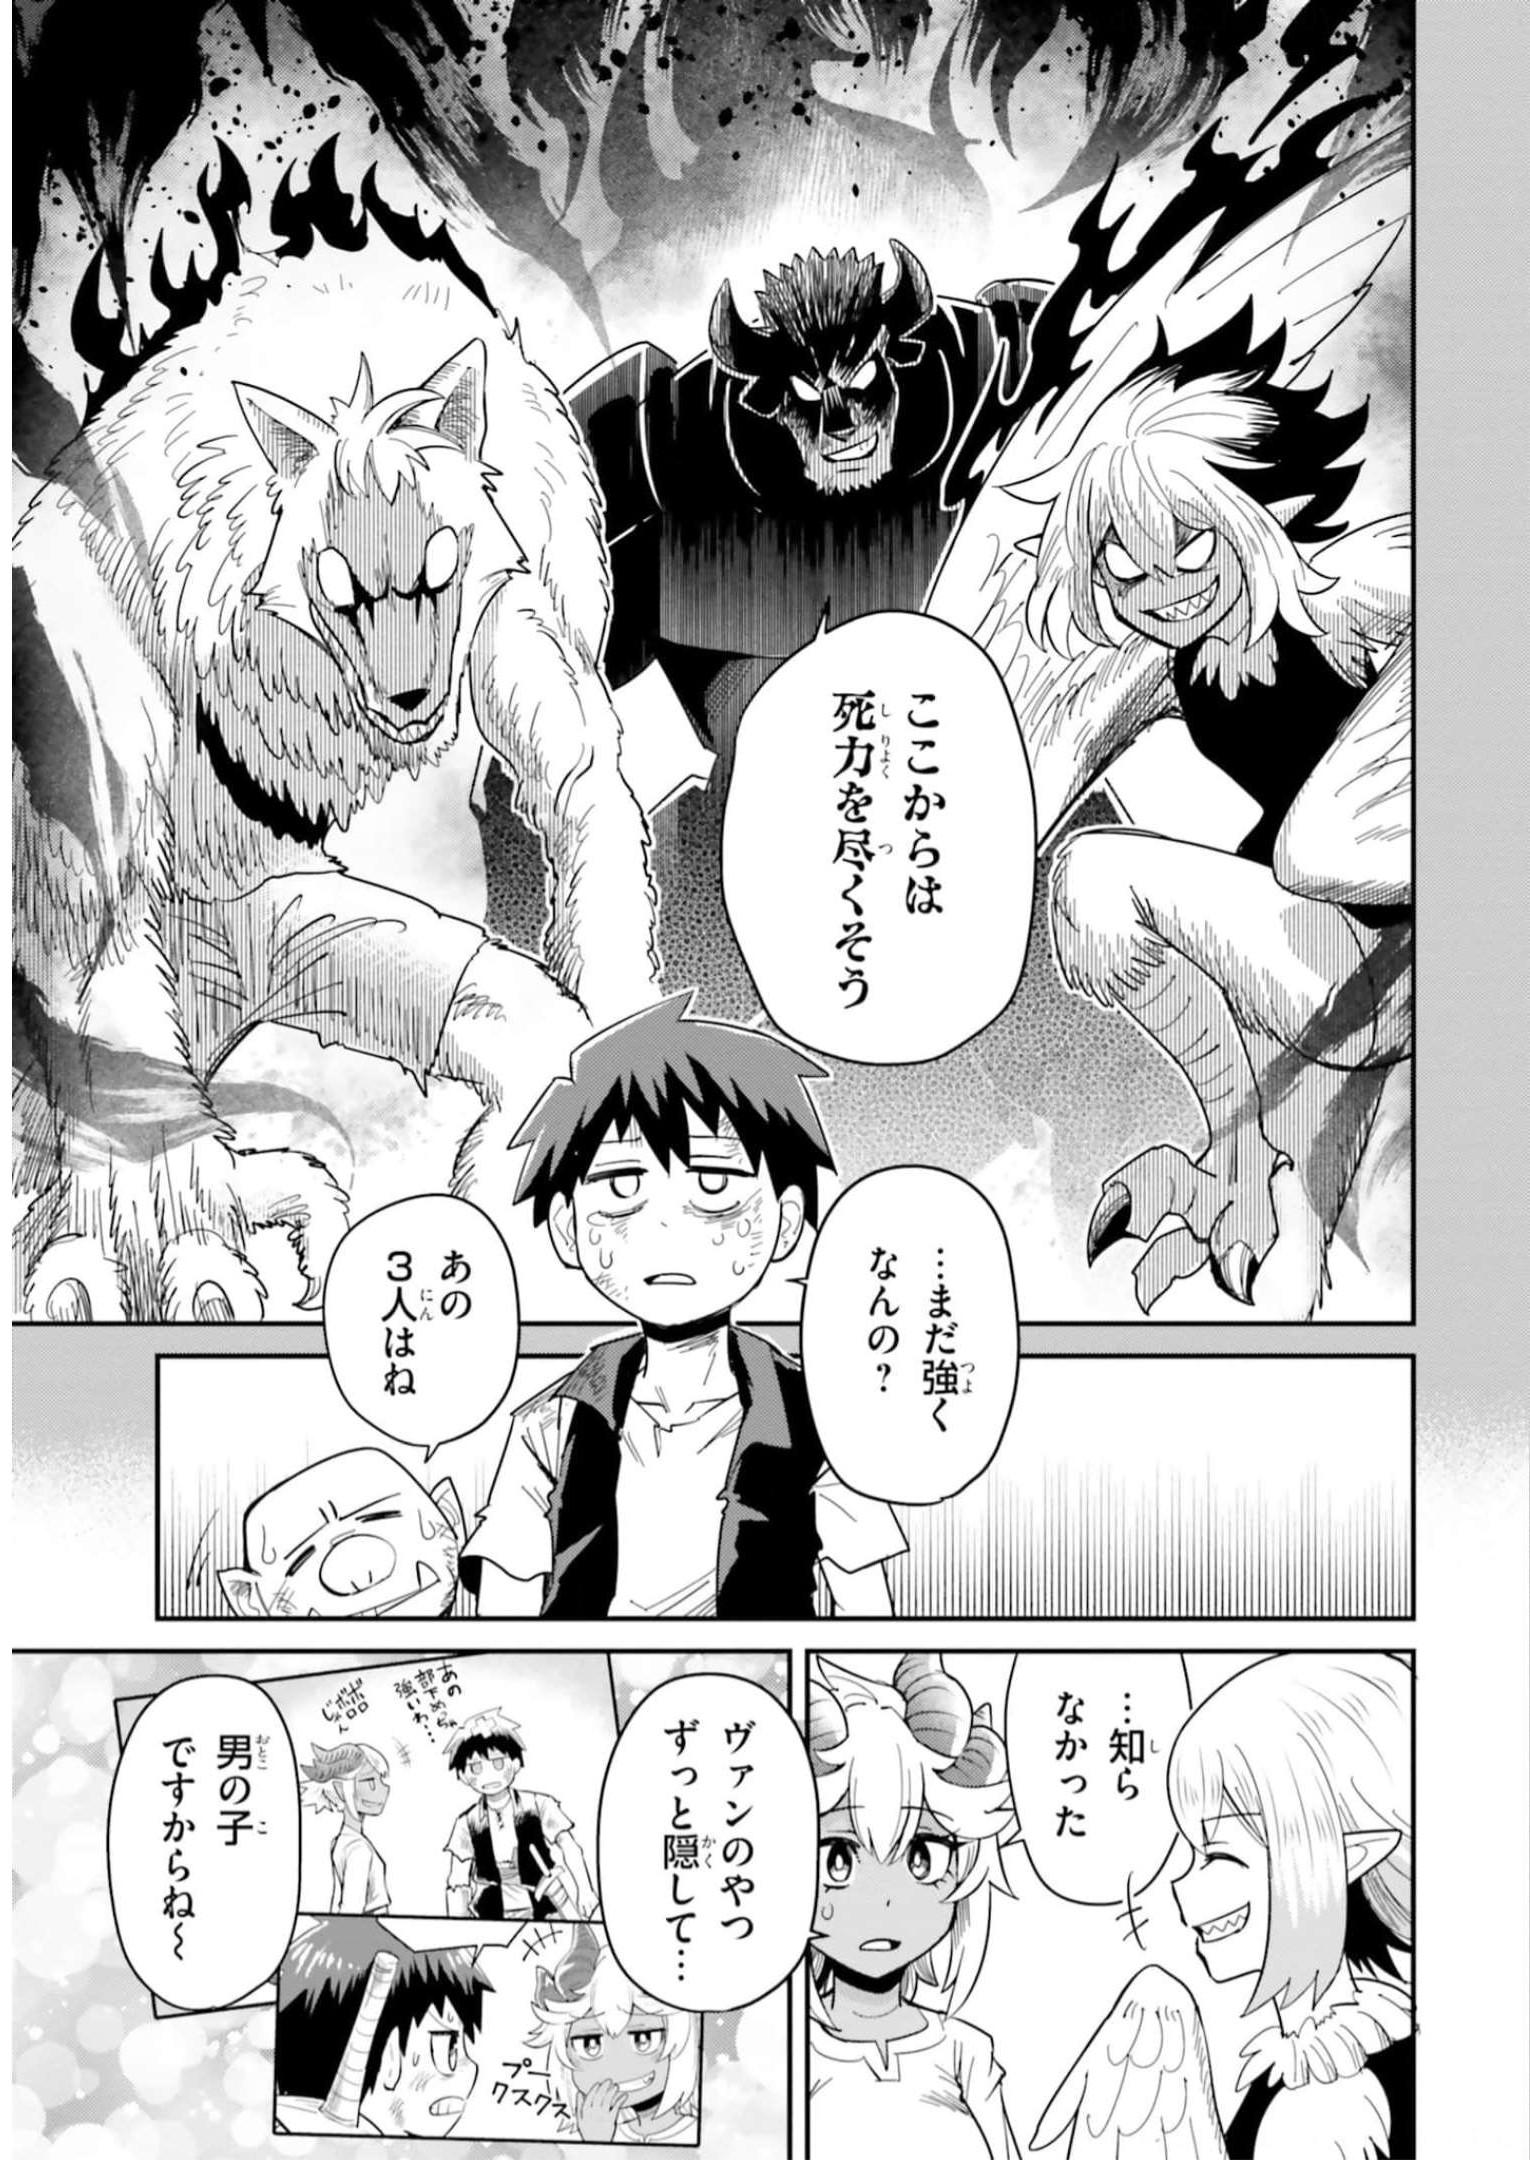 Dungeon Friends Forever Dungeon's Childhood Friend ダンジョンの幼なじみ 第26話 - Page 11